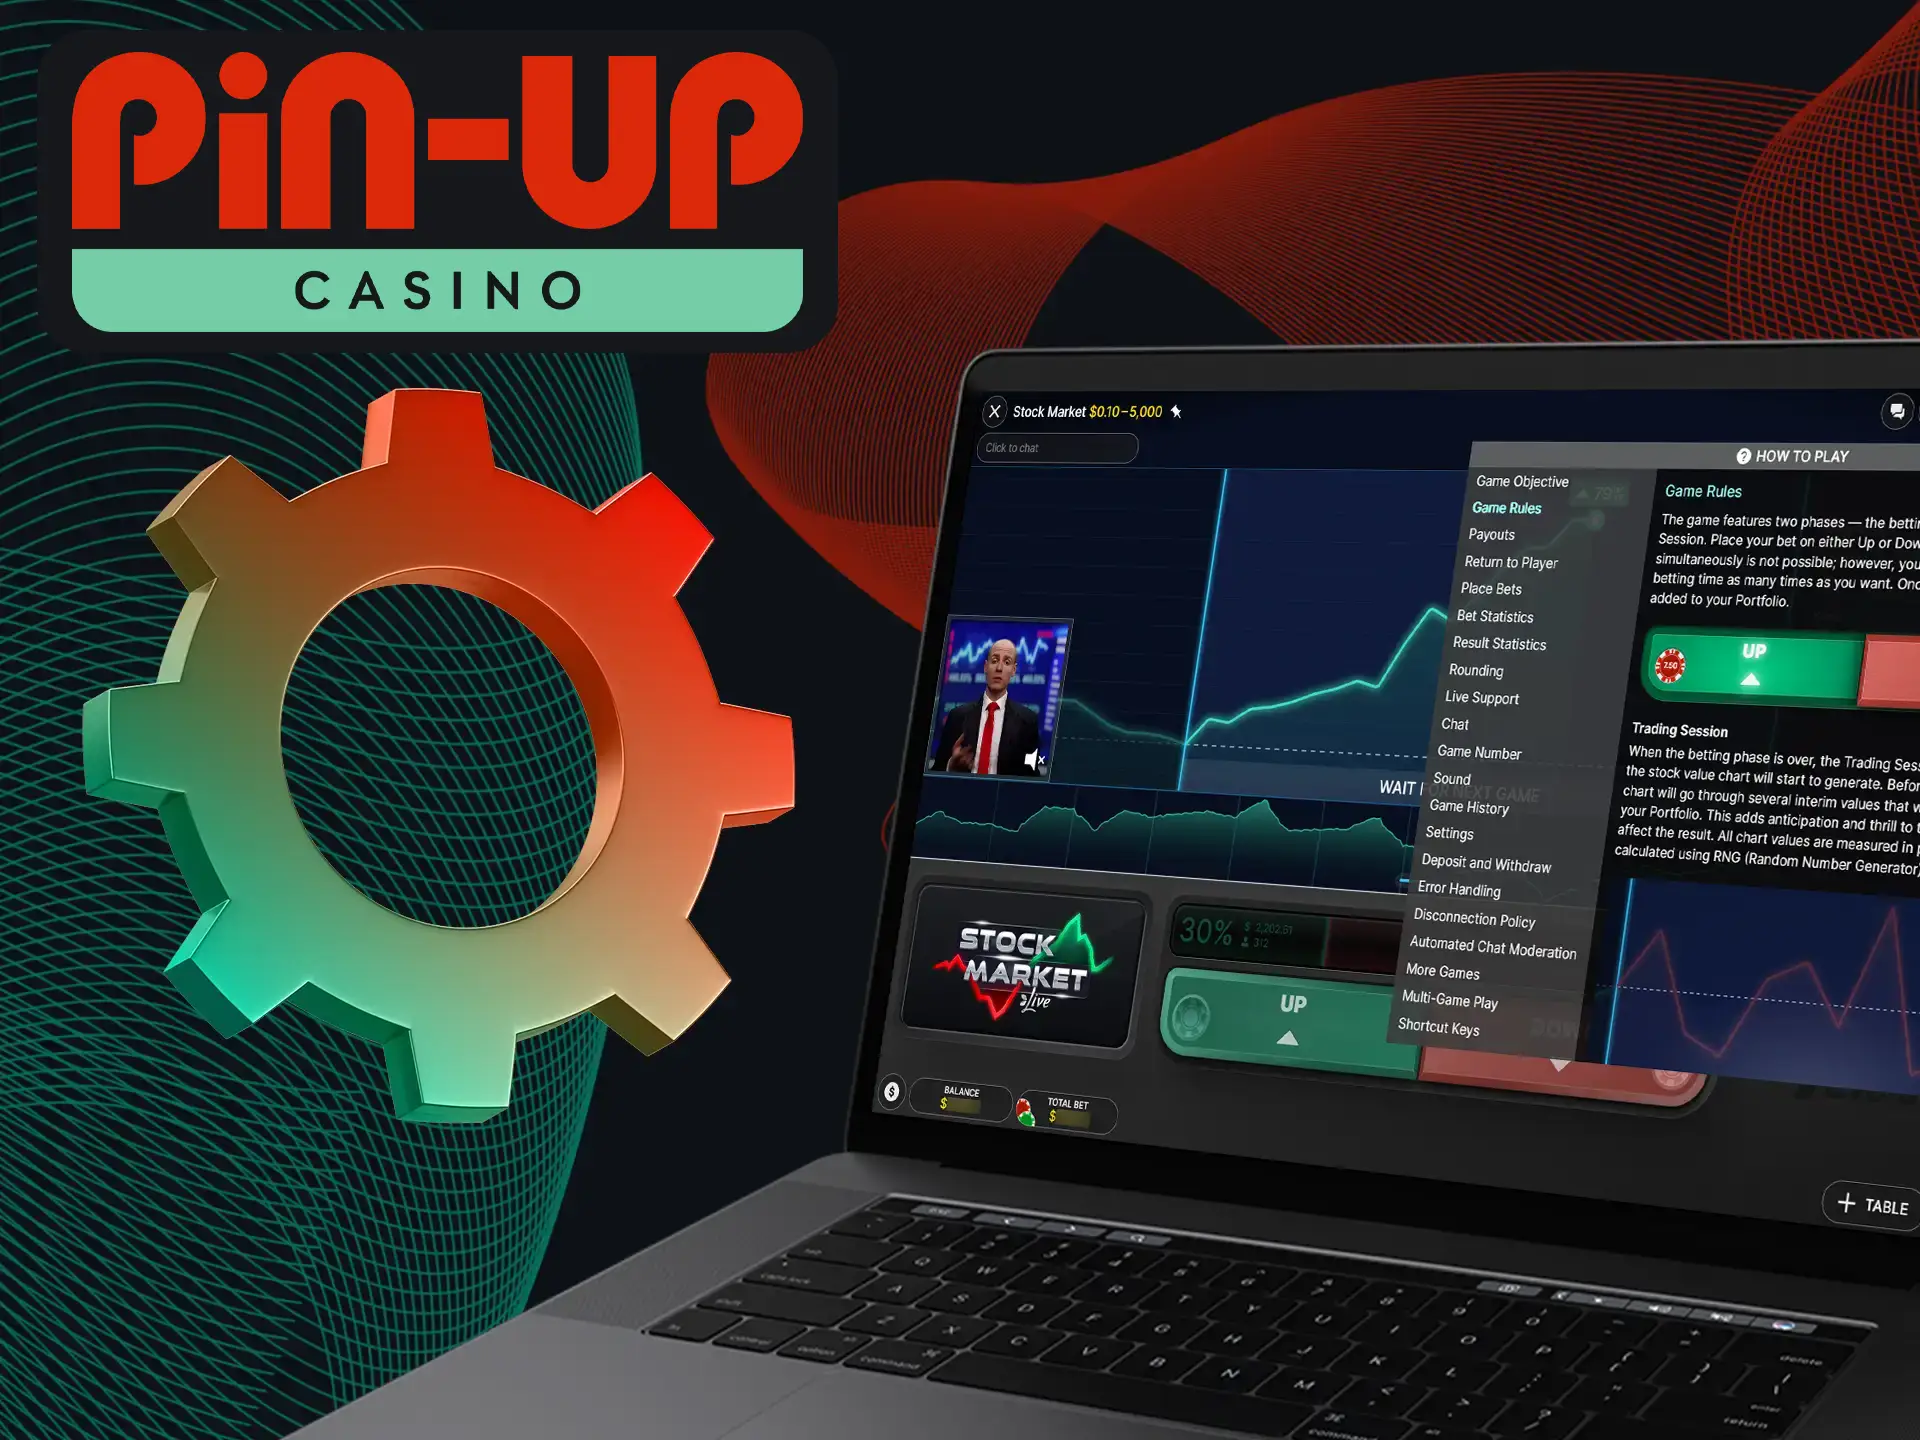 Learn about the Stock Market rules for playing at Pin-Up Casino.